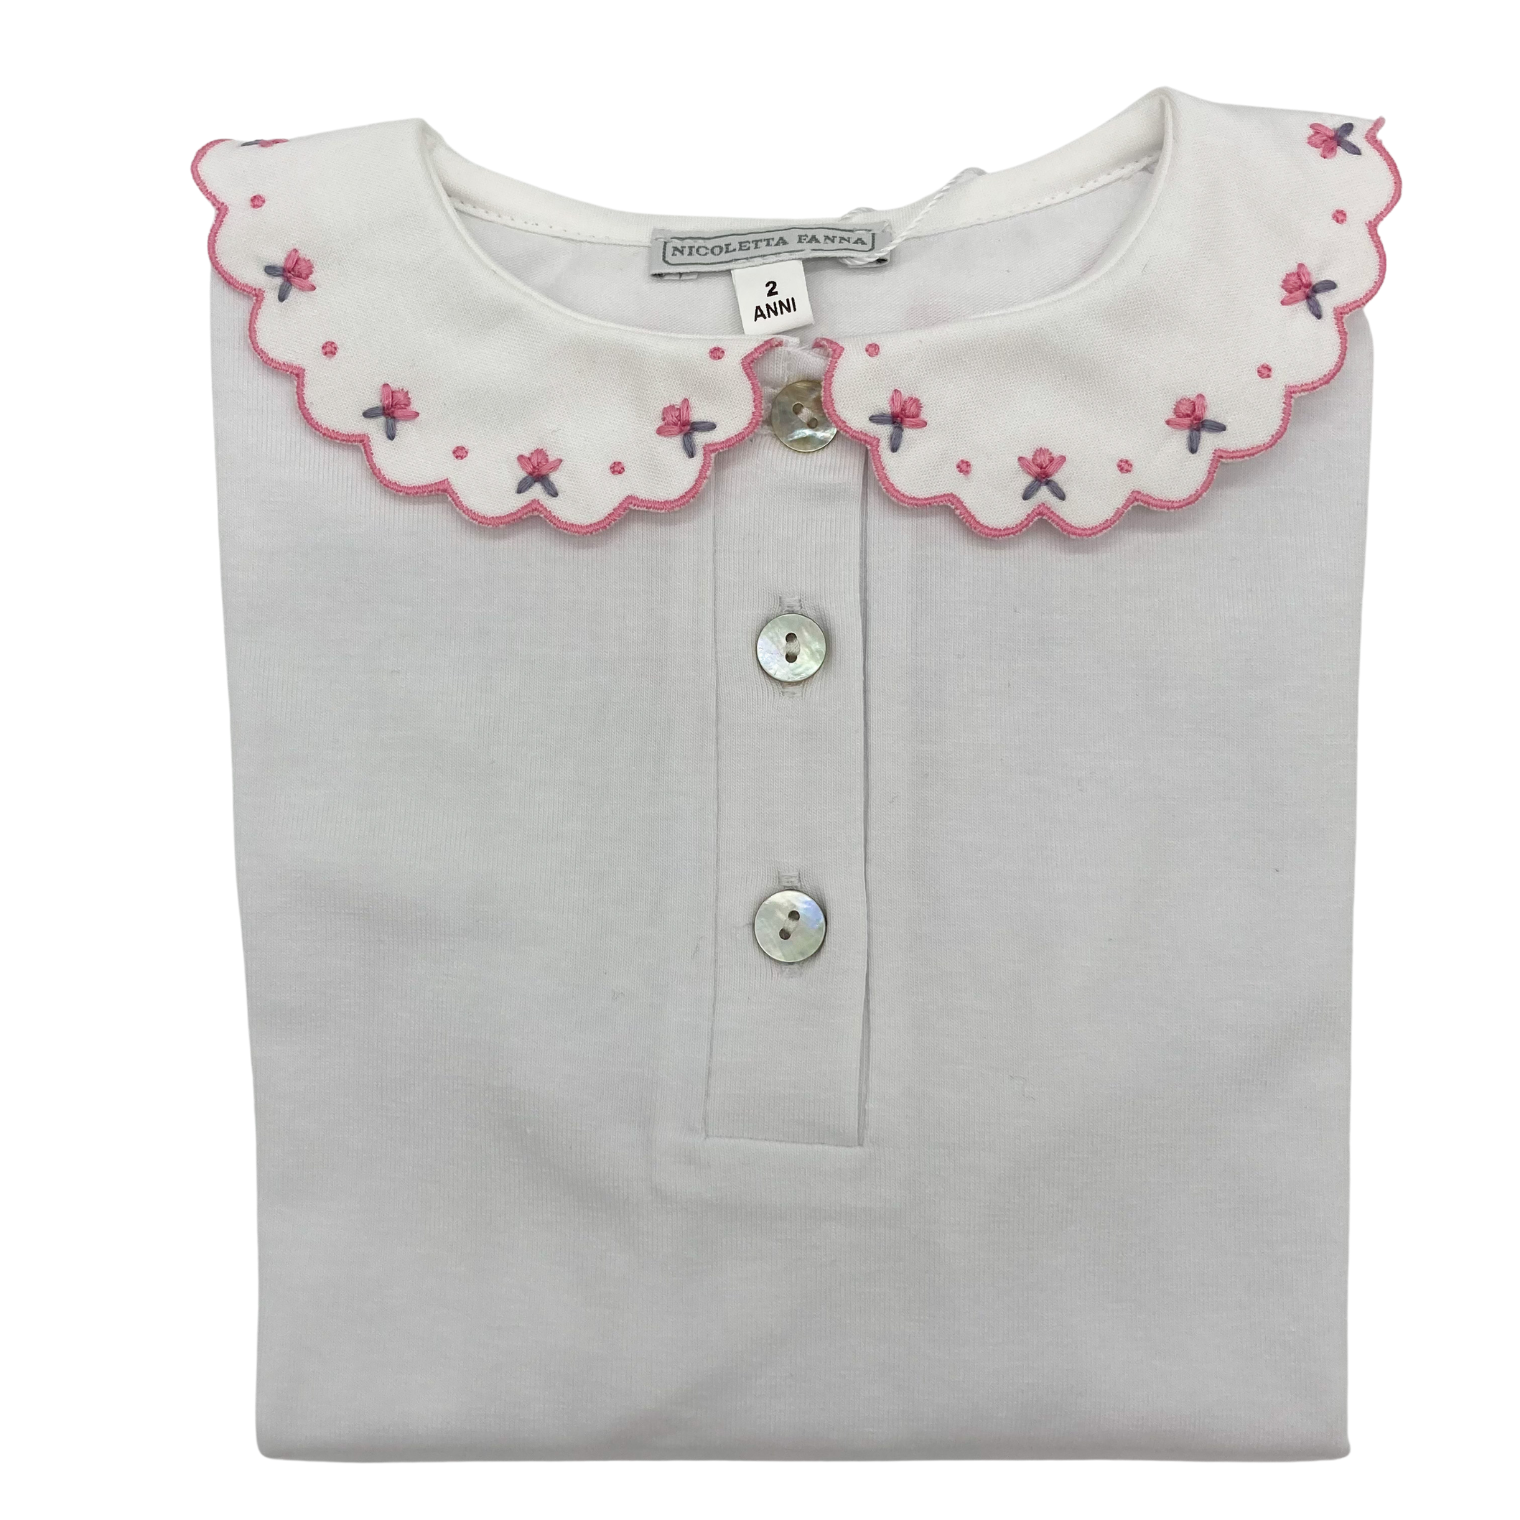 White Cotton Shirt with Embroidered Collar - Penny - Nicoletta Fanna